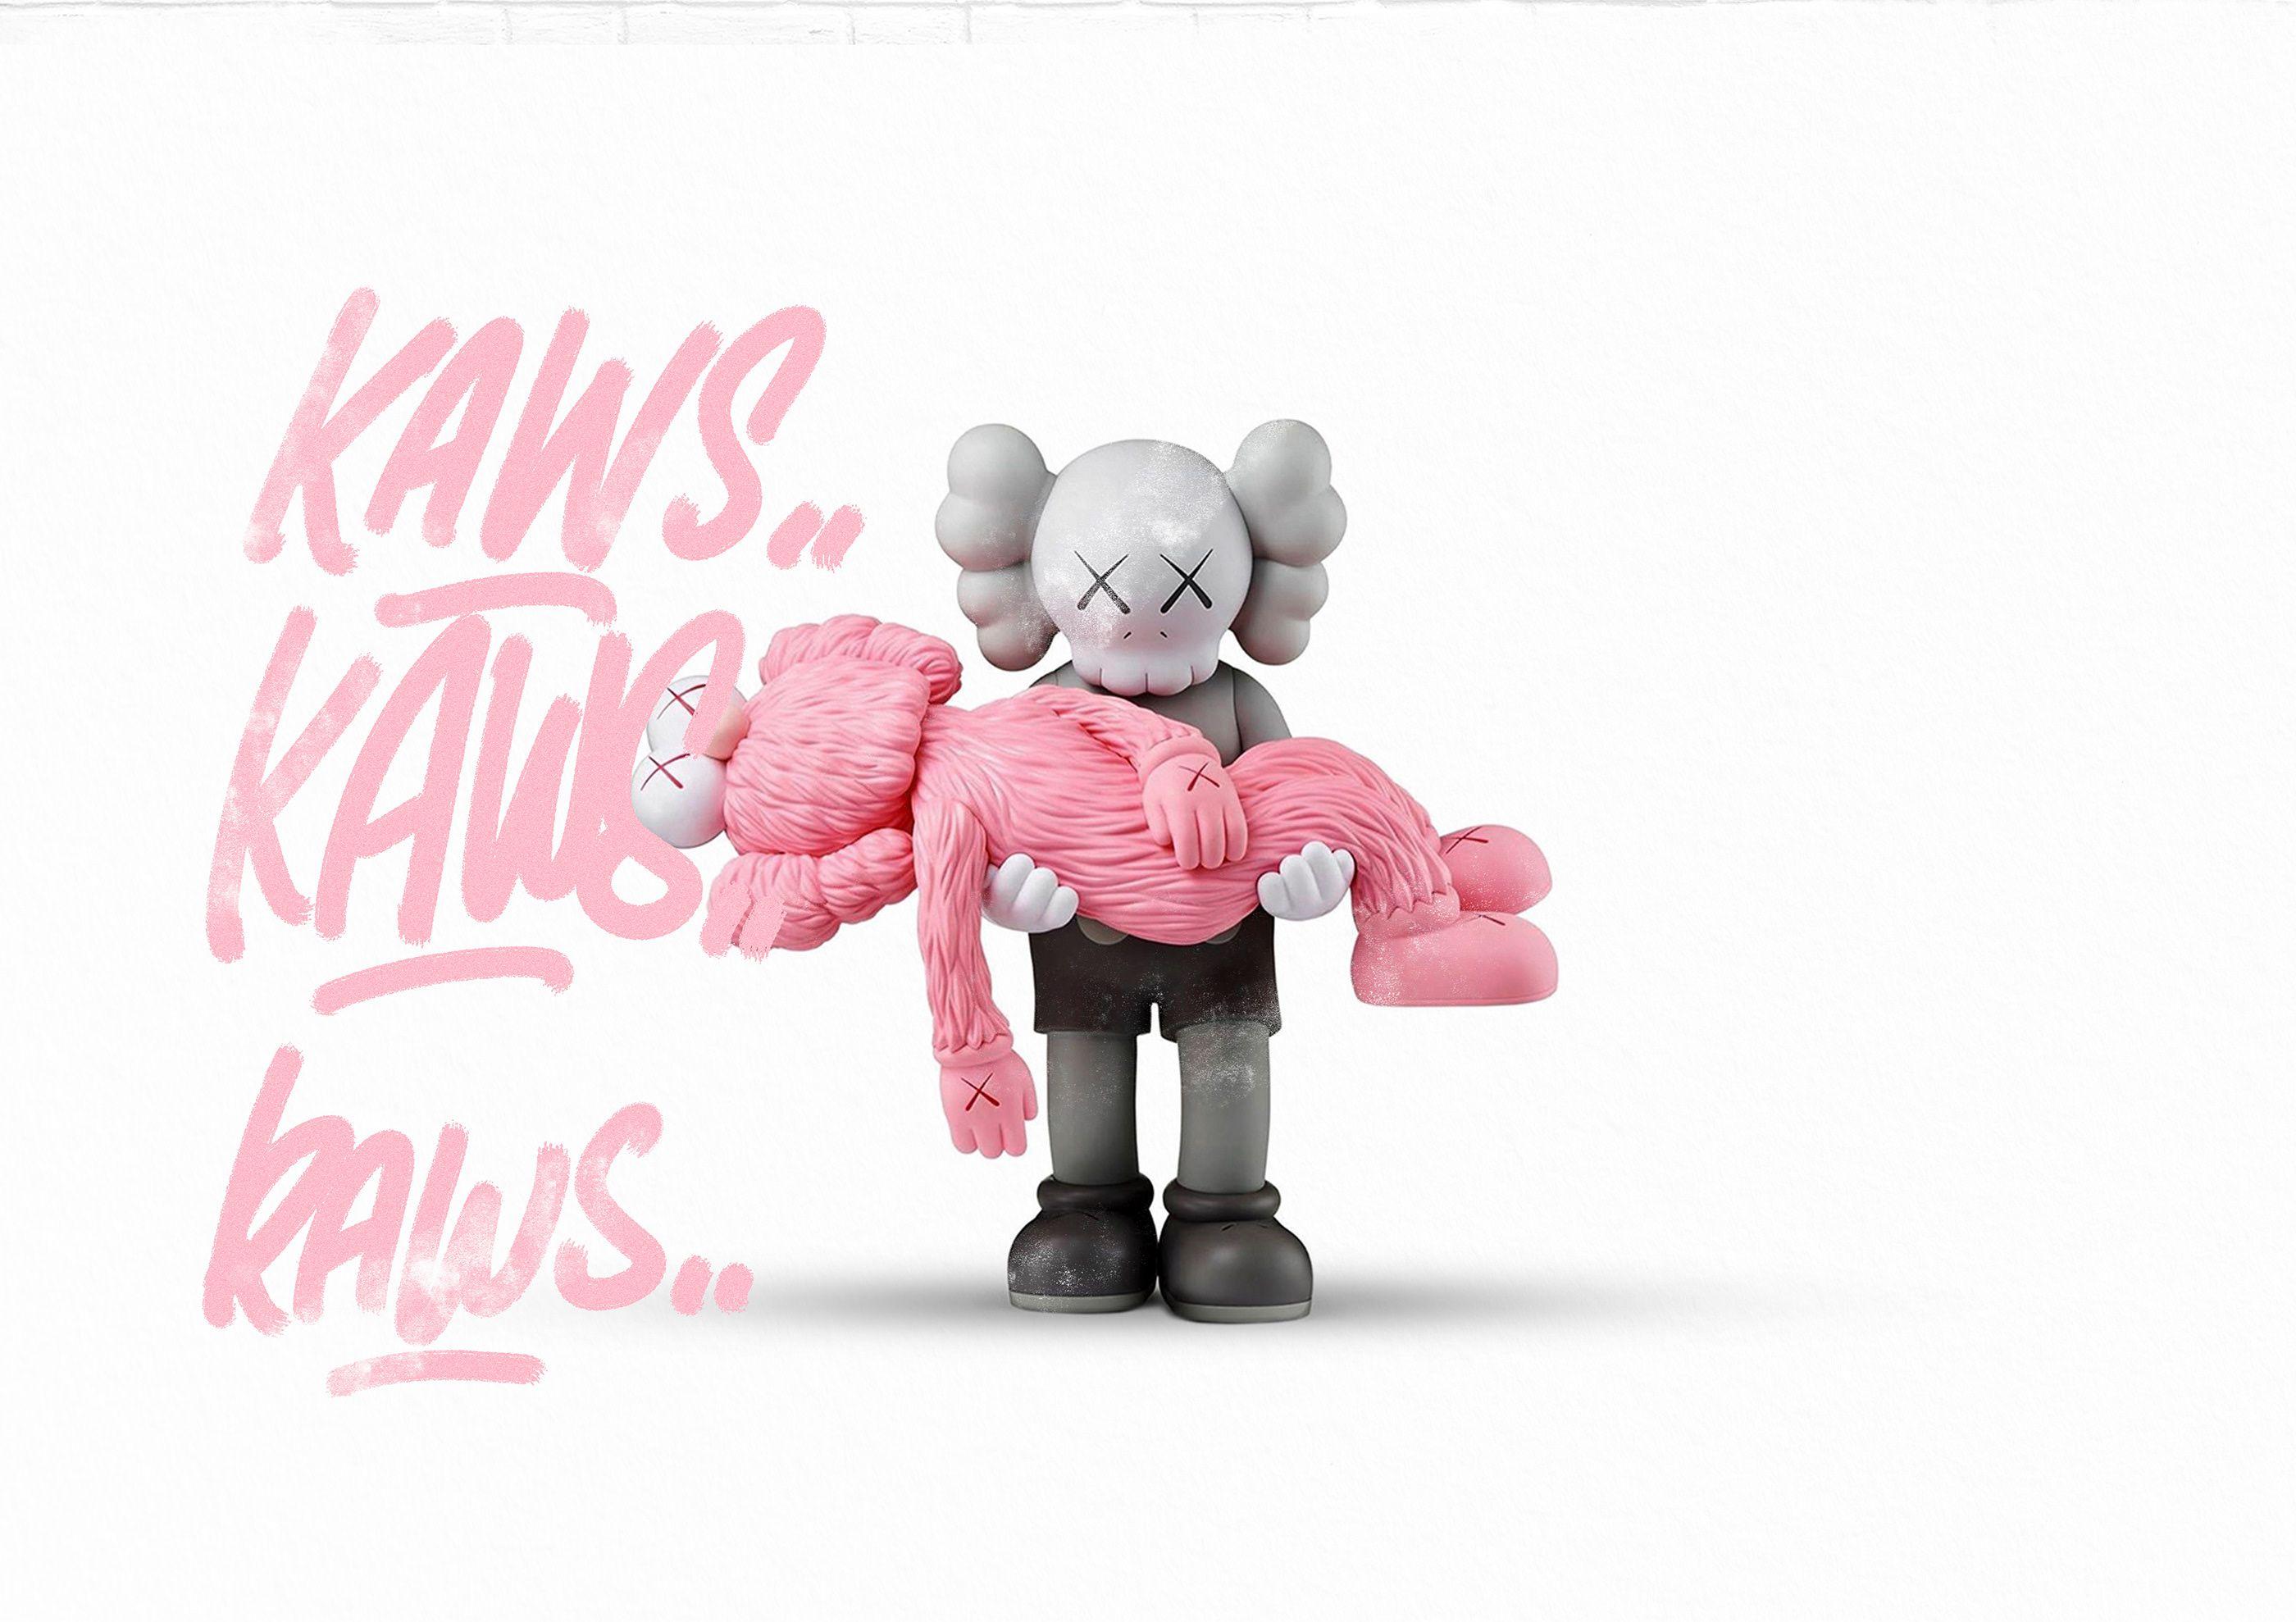 Kaws Paint Posters On iPhone Wallpaper